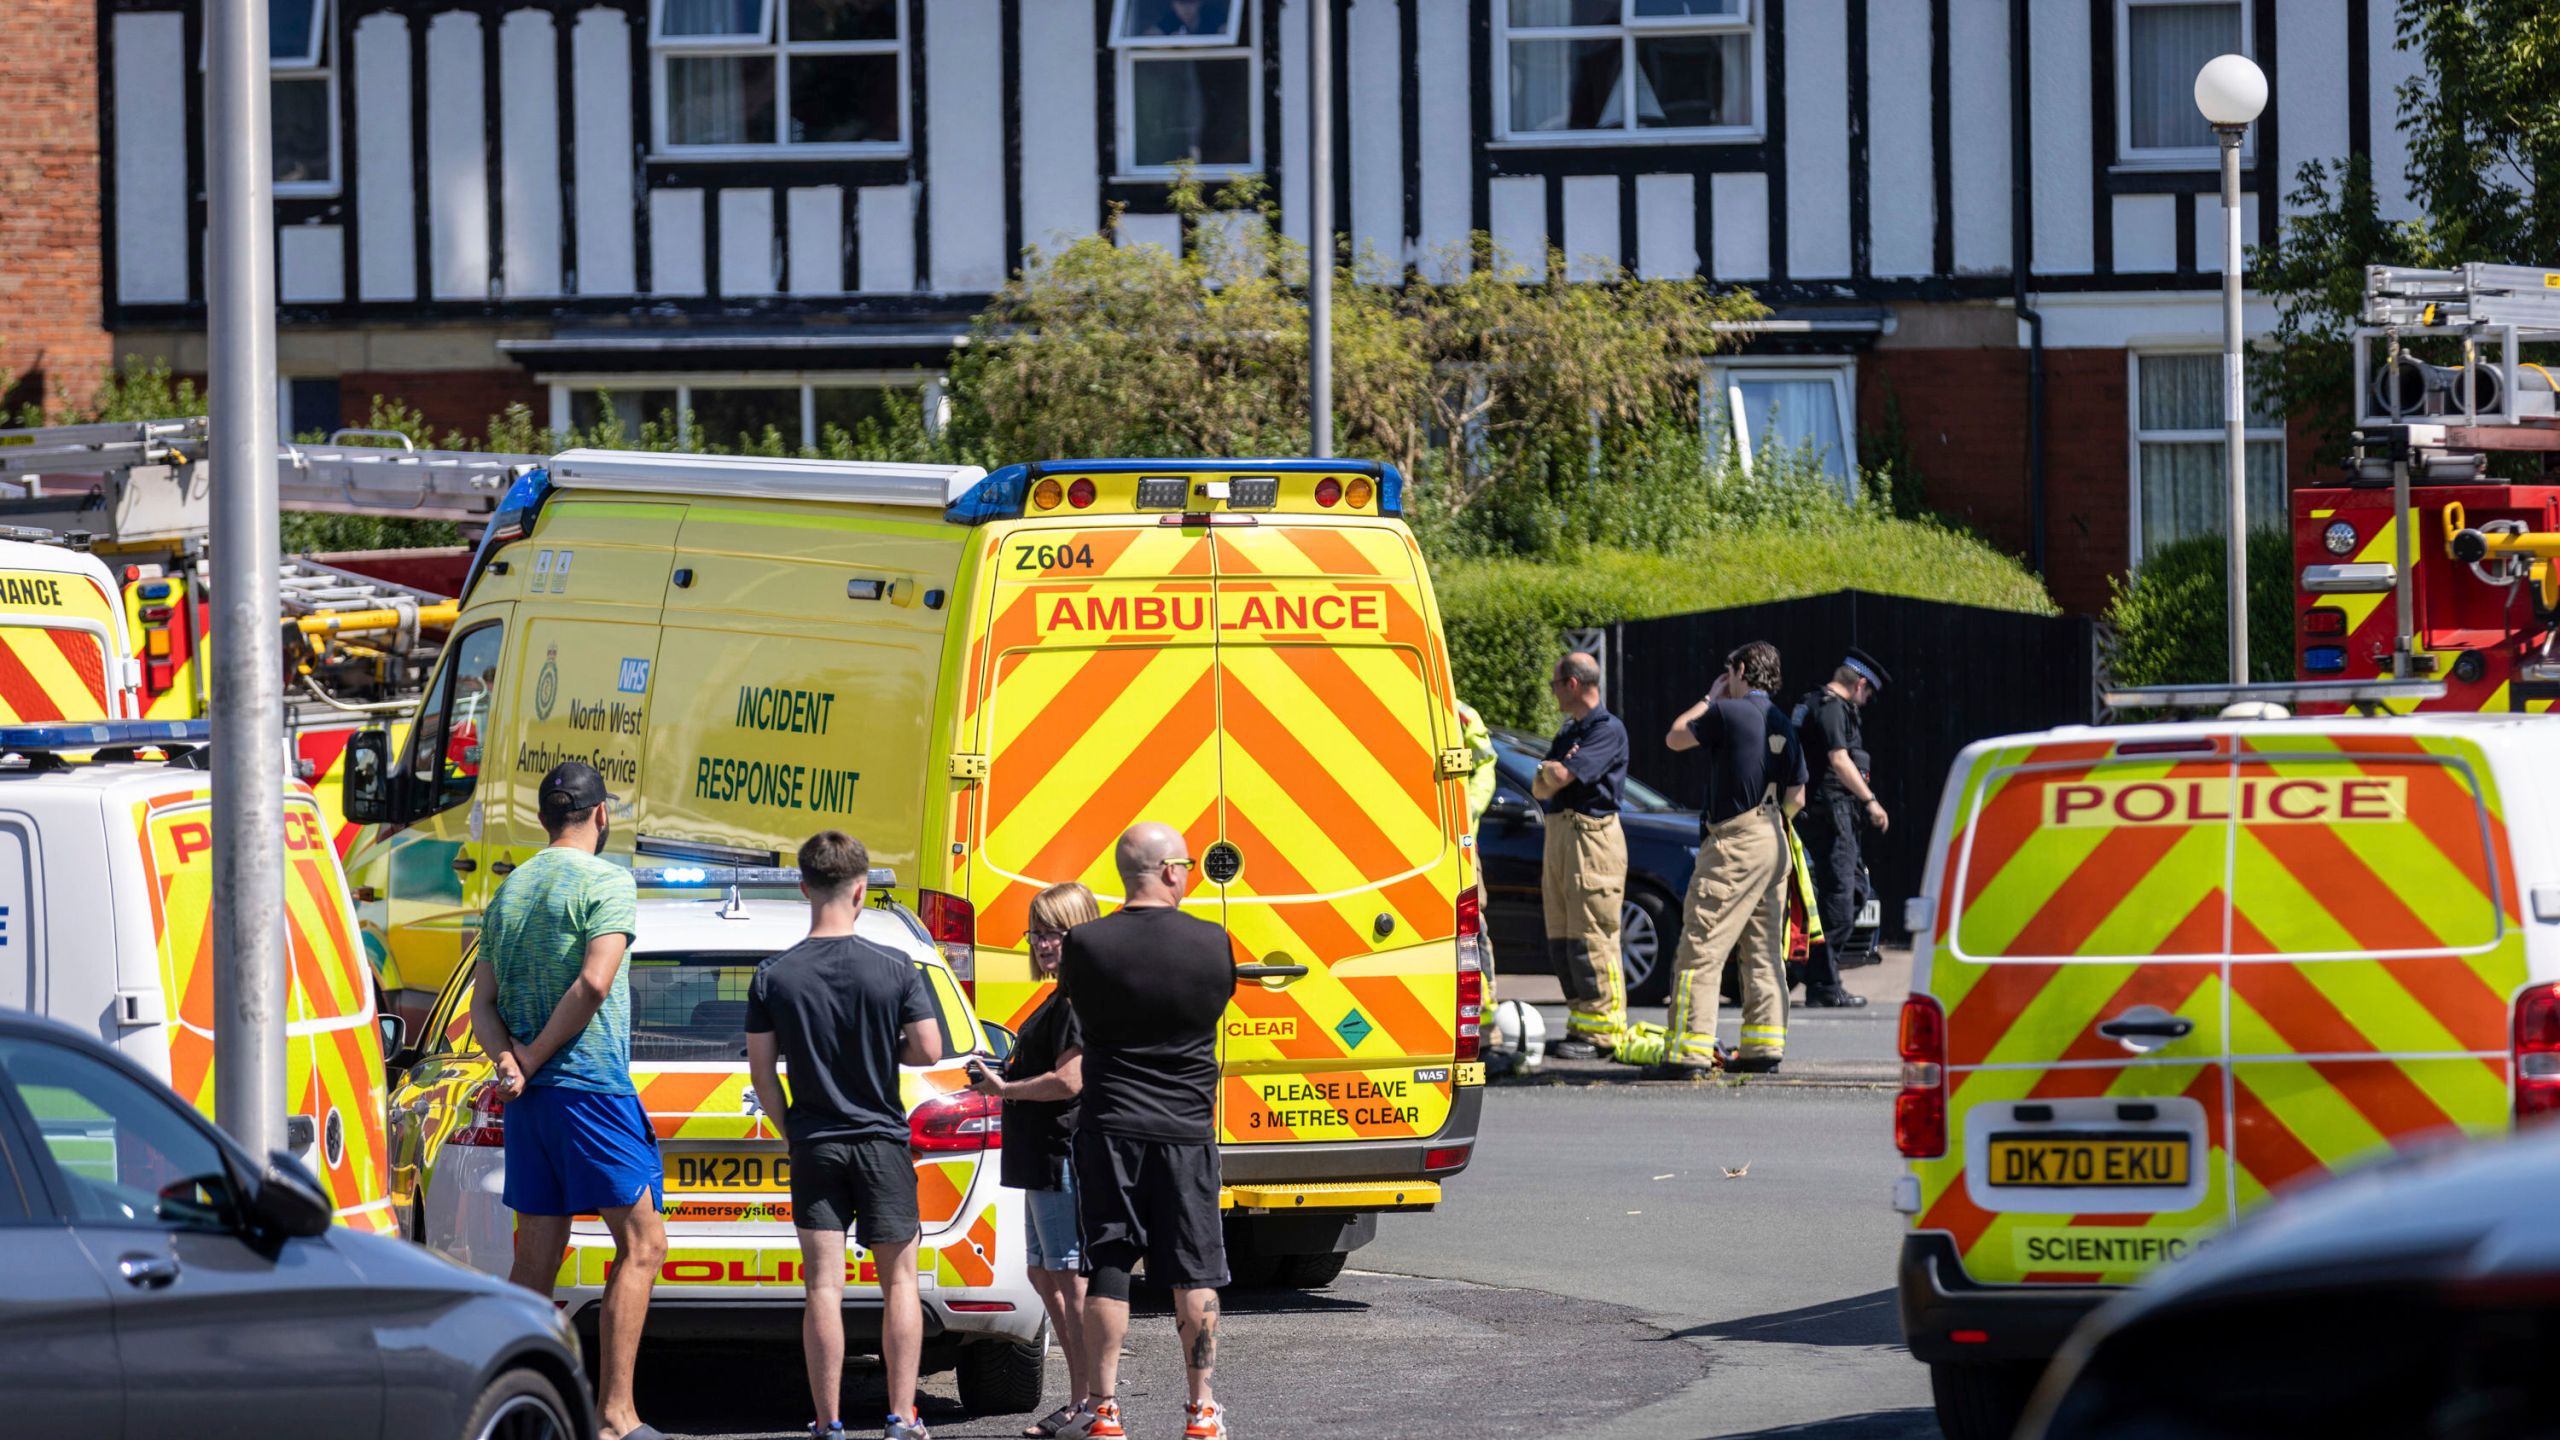 Knife attack in UK: Death toll rises to 3